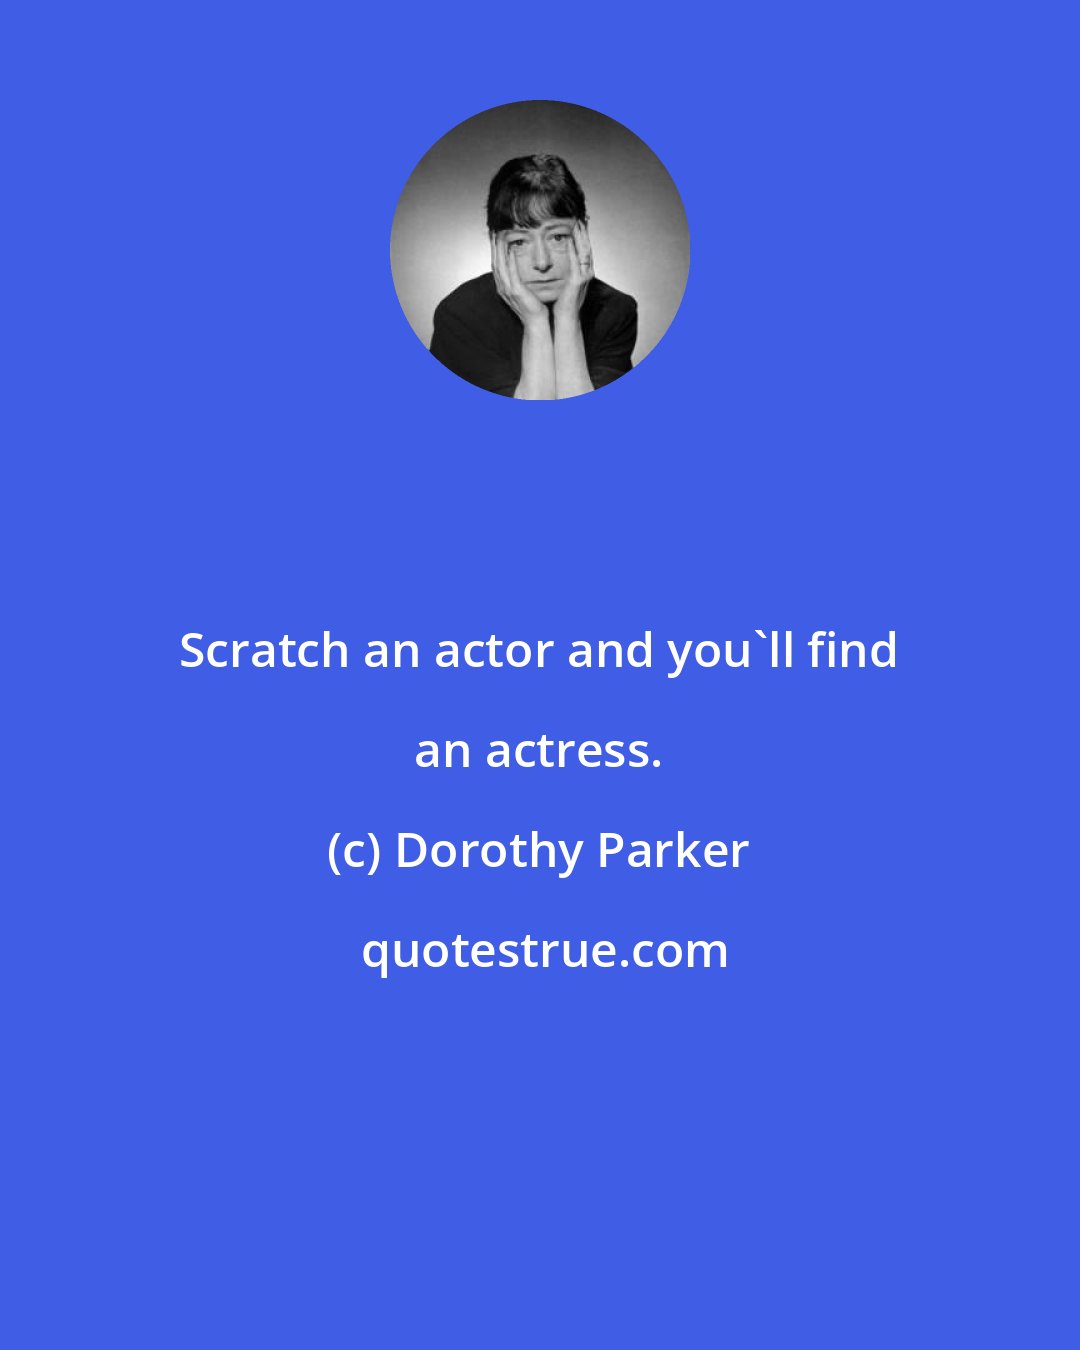 Dorothy Parker: Scratch an actor and you'll find an actress.